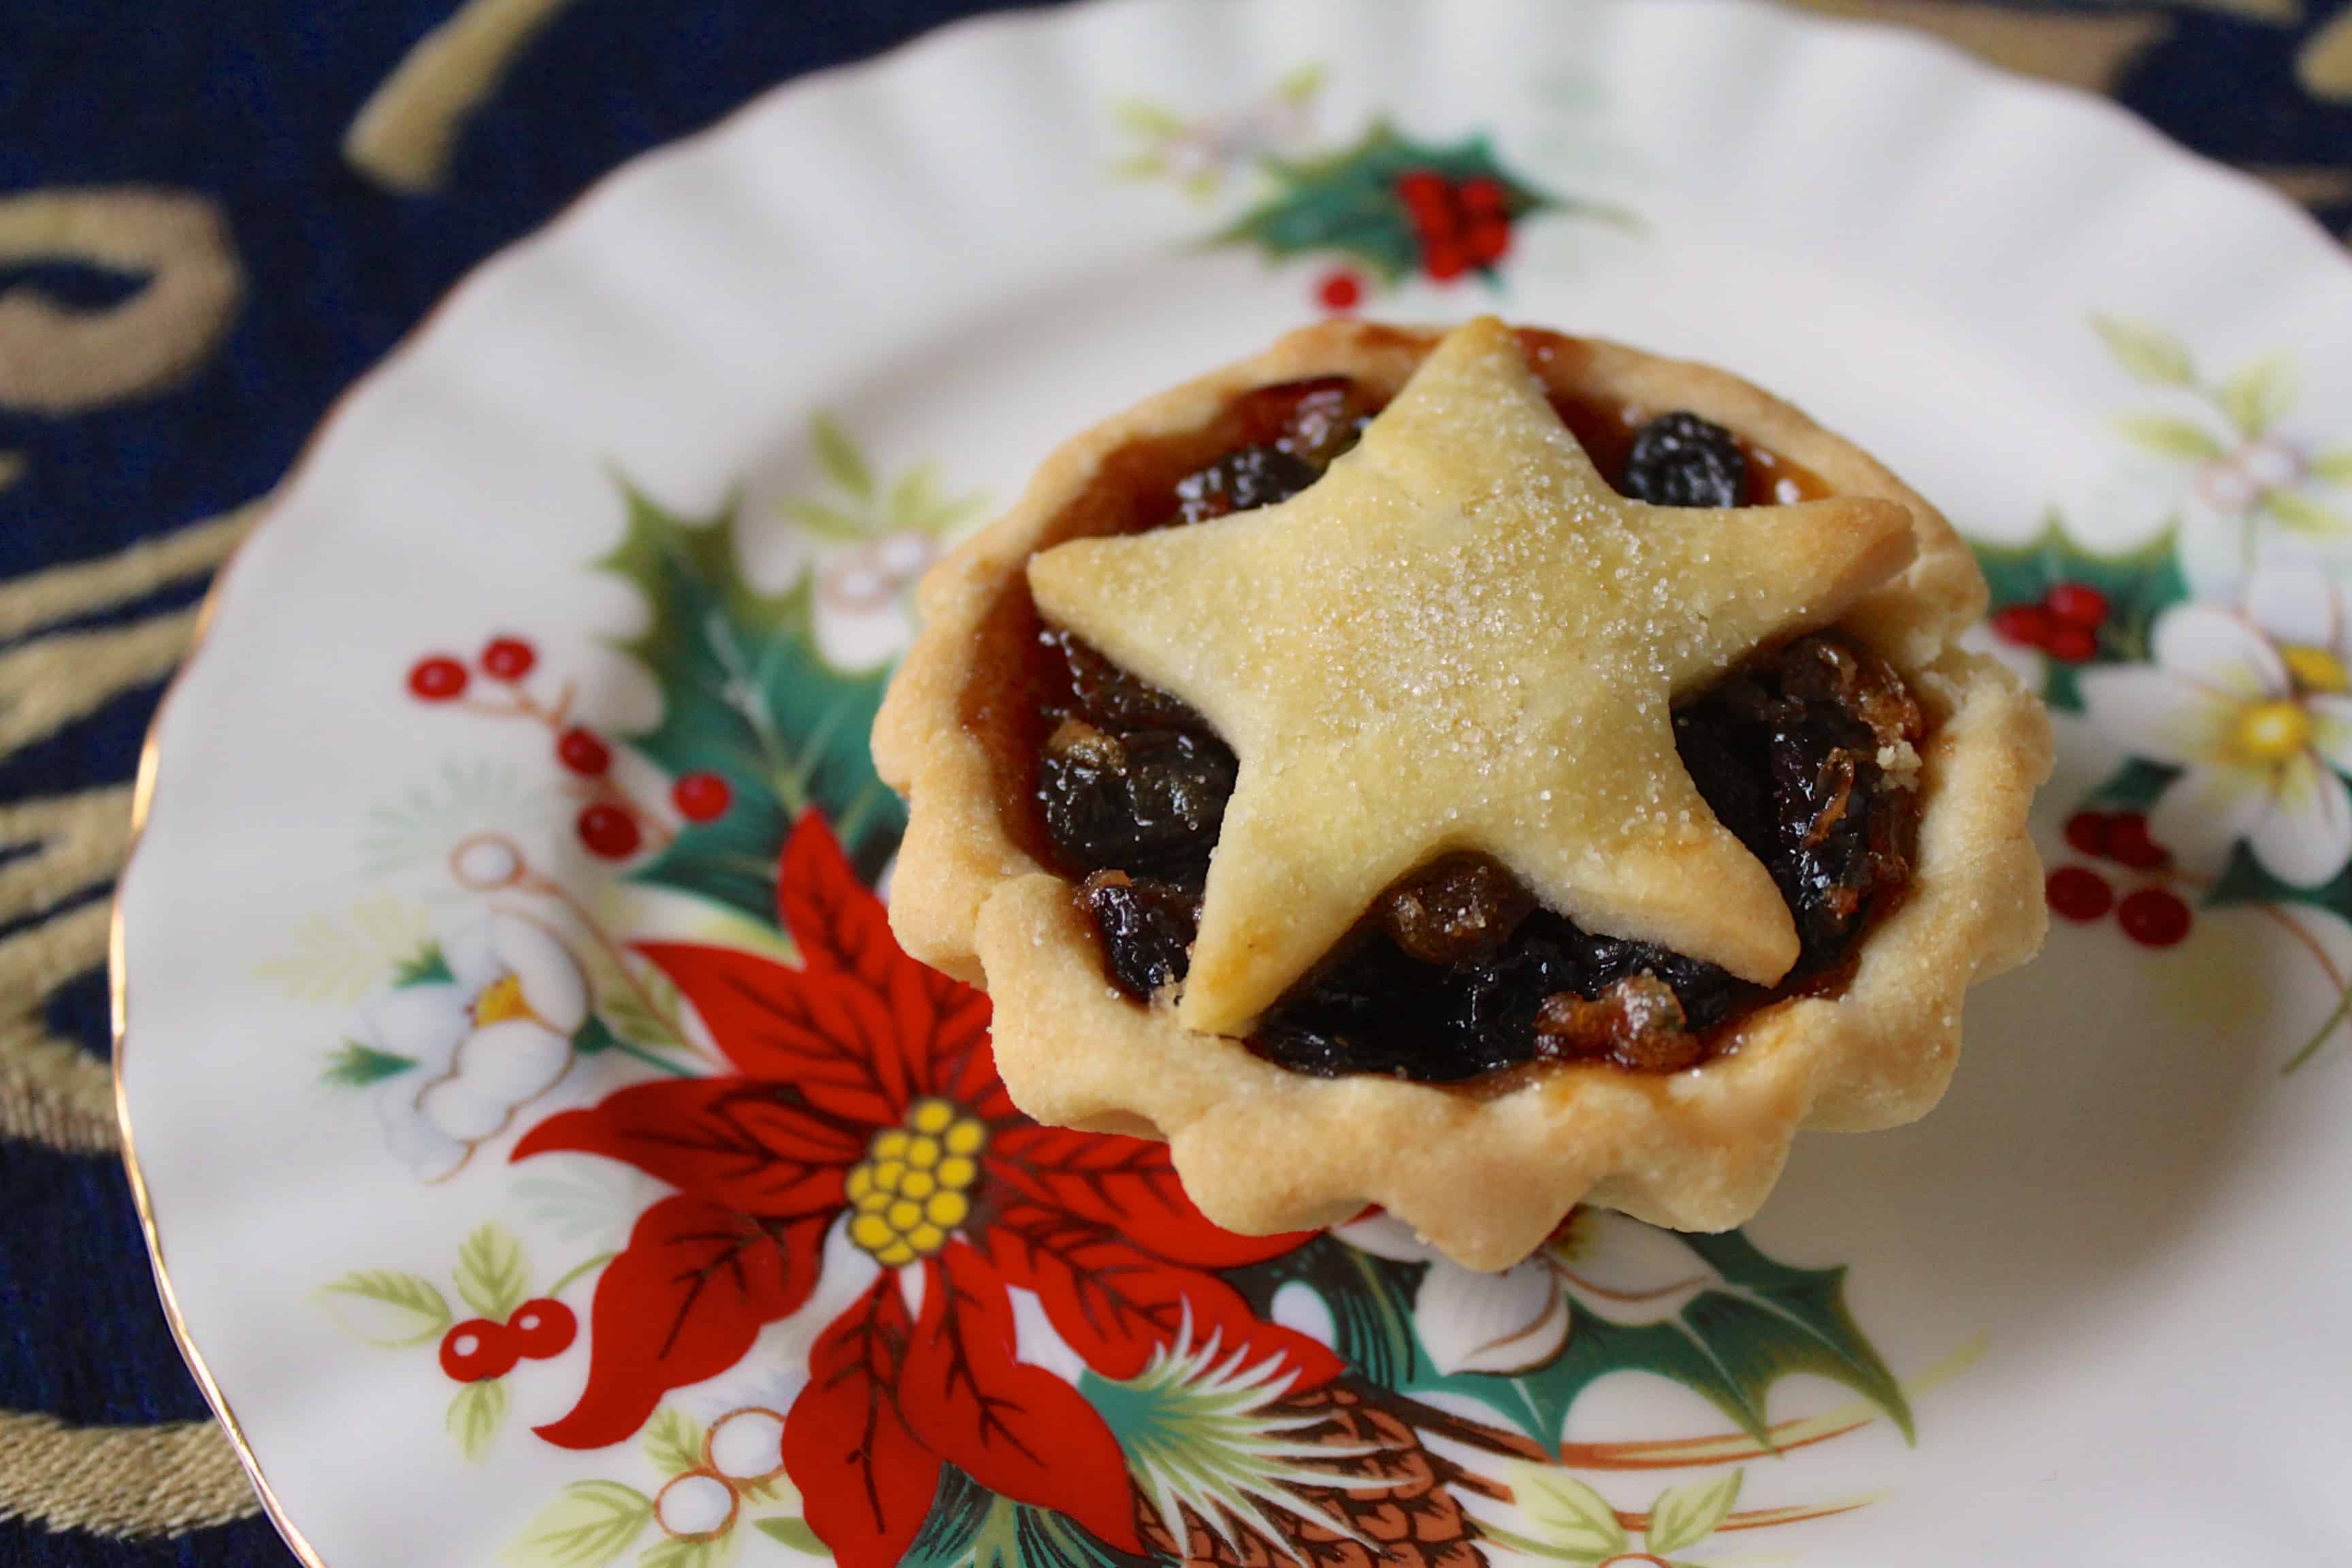 Mince Pies Mincemeat Pies for a Traditional British Christmas Treat 